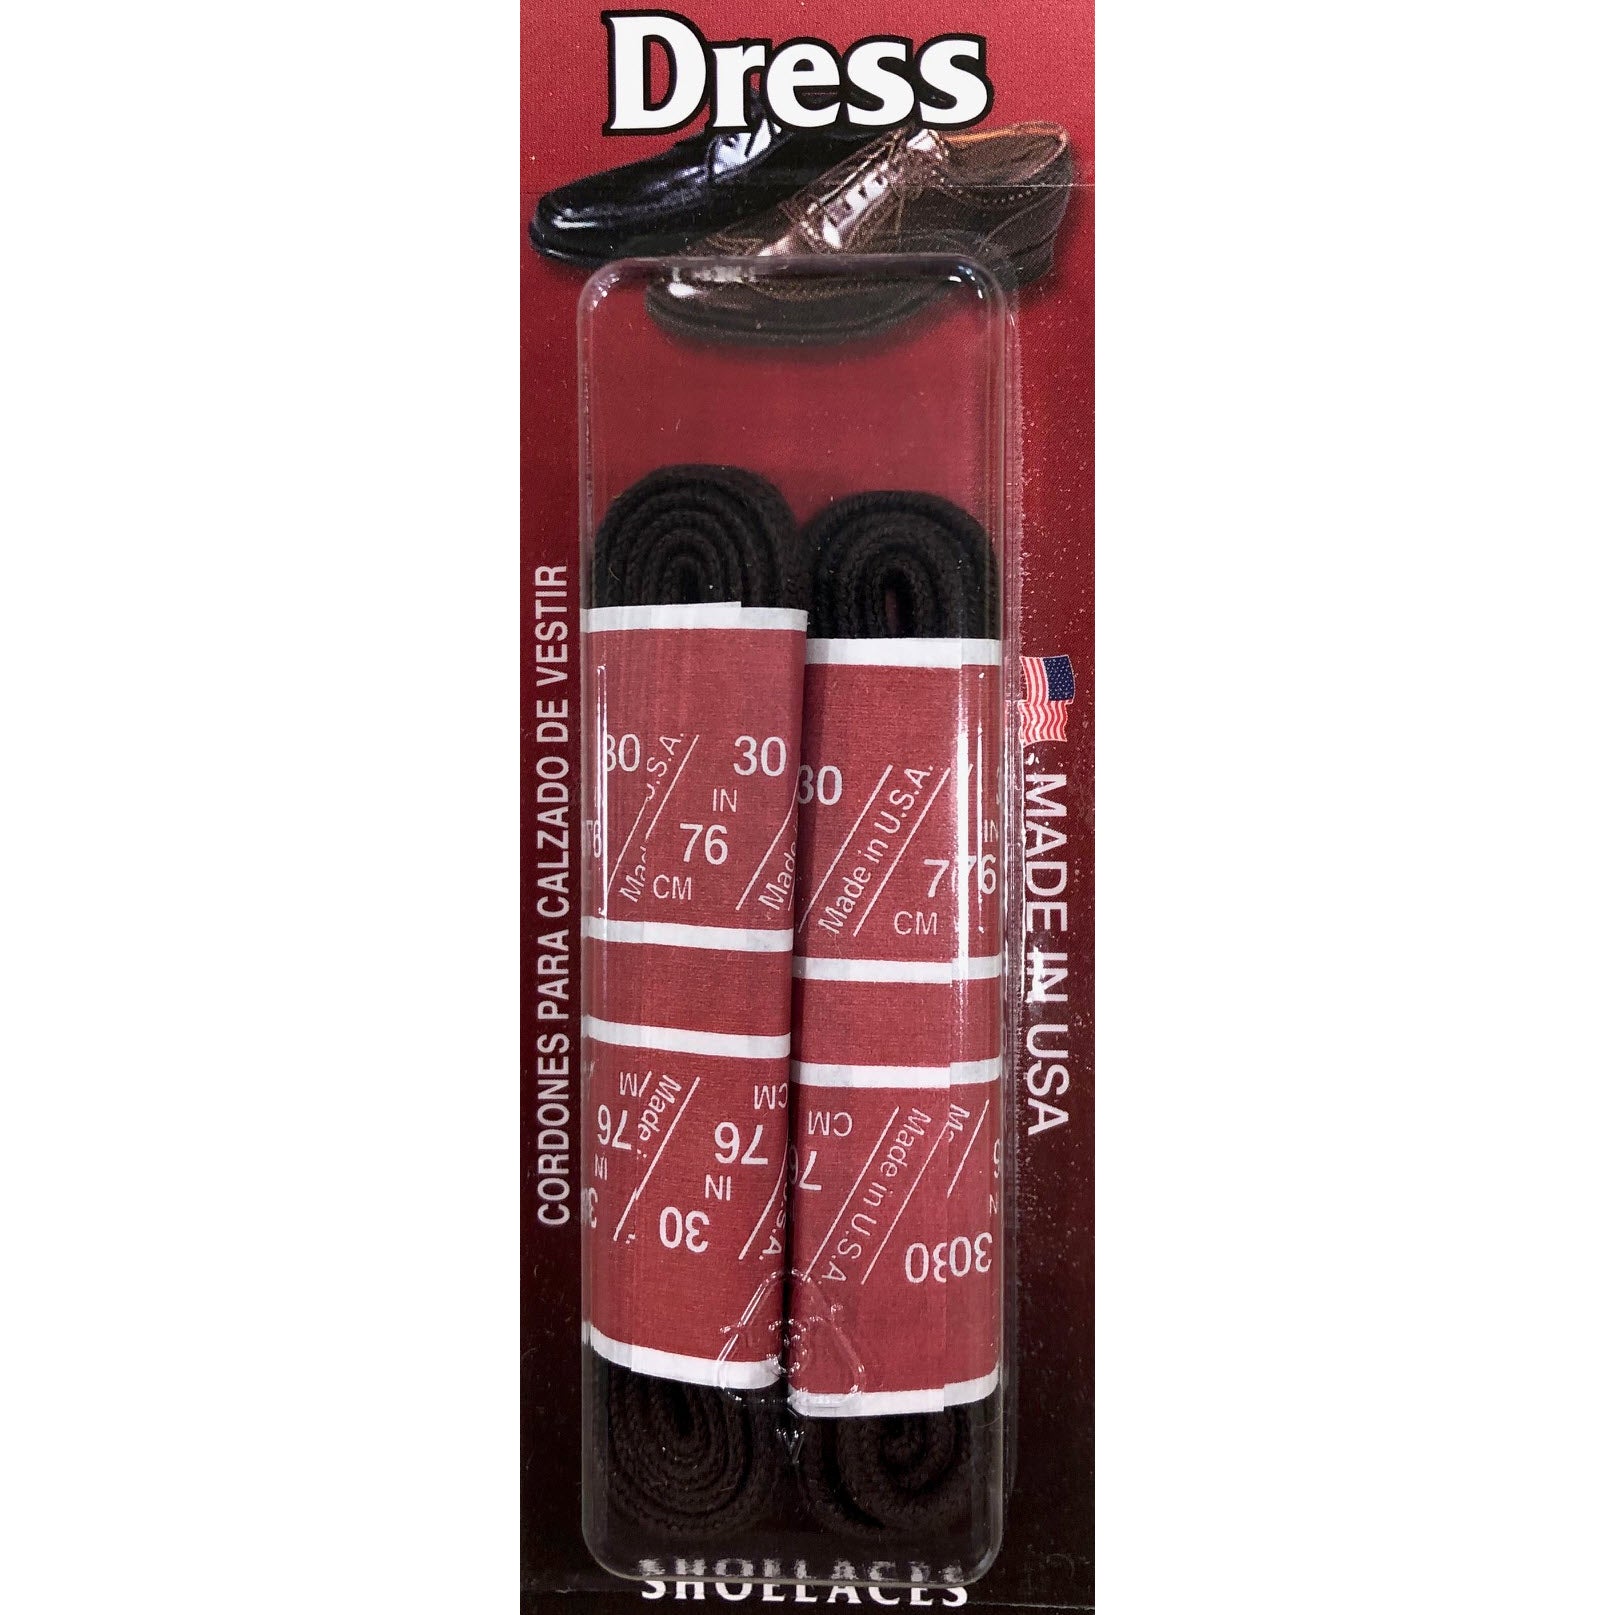 Package of FRANKFORD LEATHER 30 IN ROUND DRESS BLACK shoelaces labeled "made in usa" containing two pairs of 30-inch replacement laces by F.L. Inc.